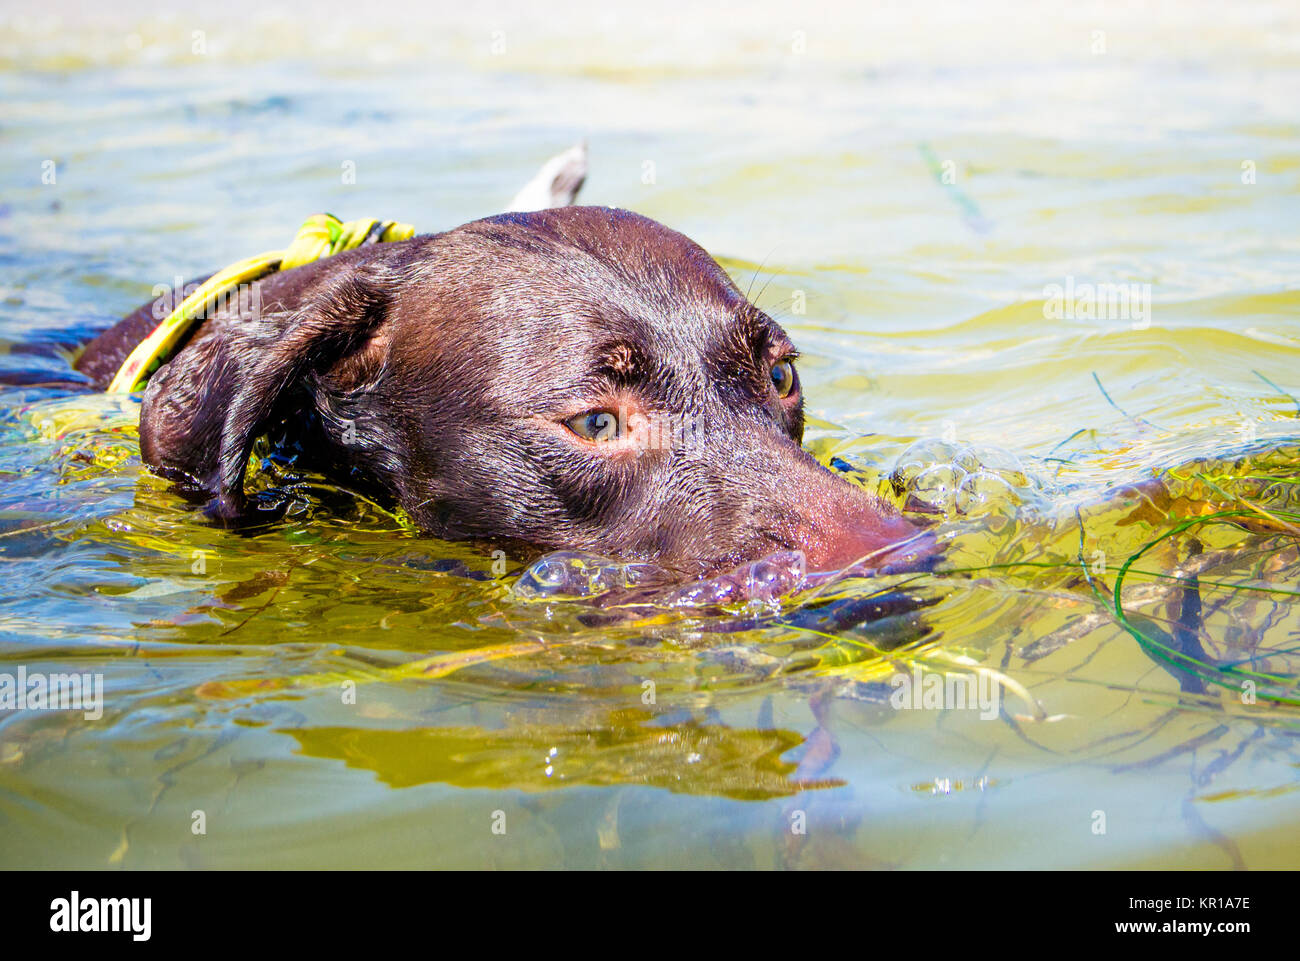 German shorthaired pointer dog swimming in ocean, Fort de Soto, Florida, United States Stock Photo